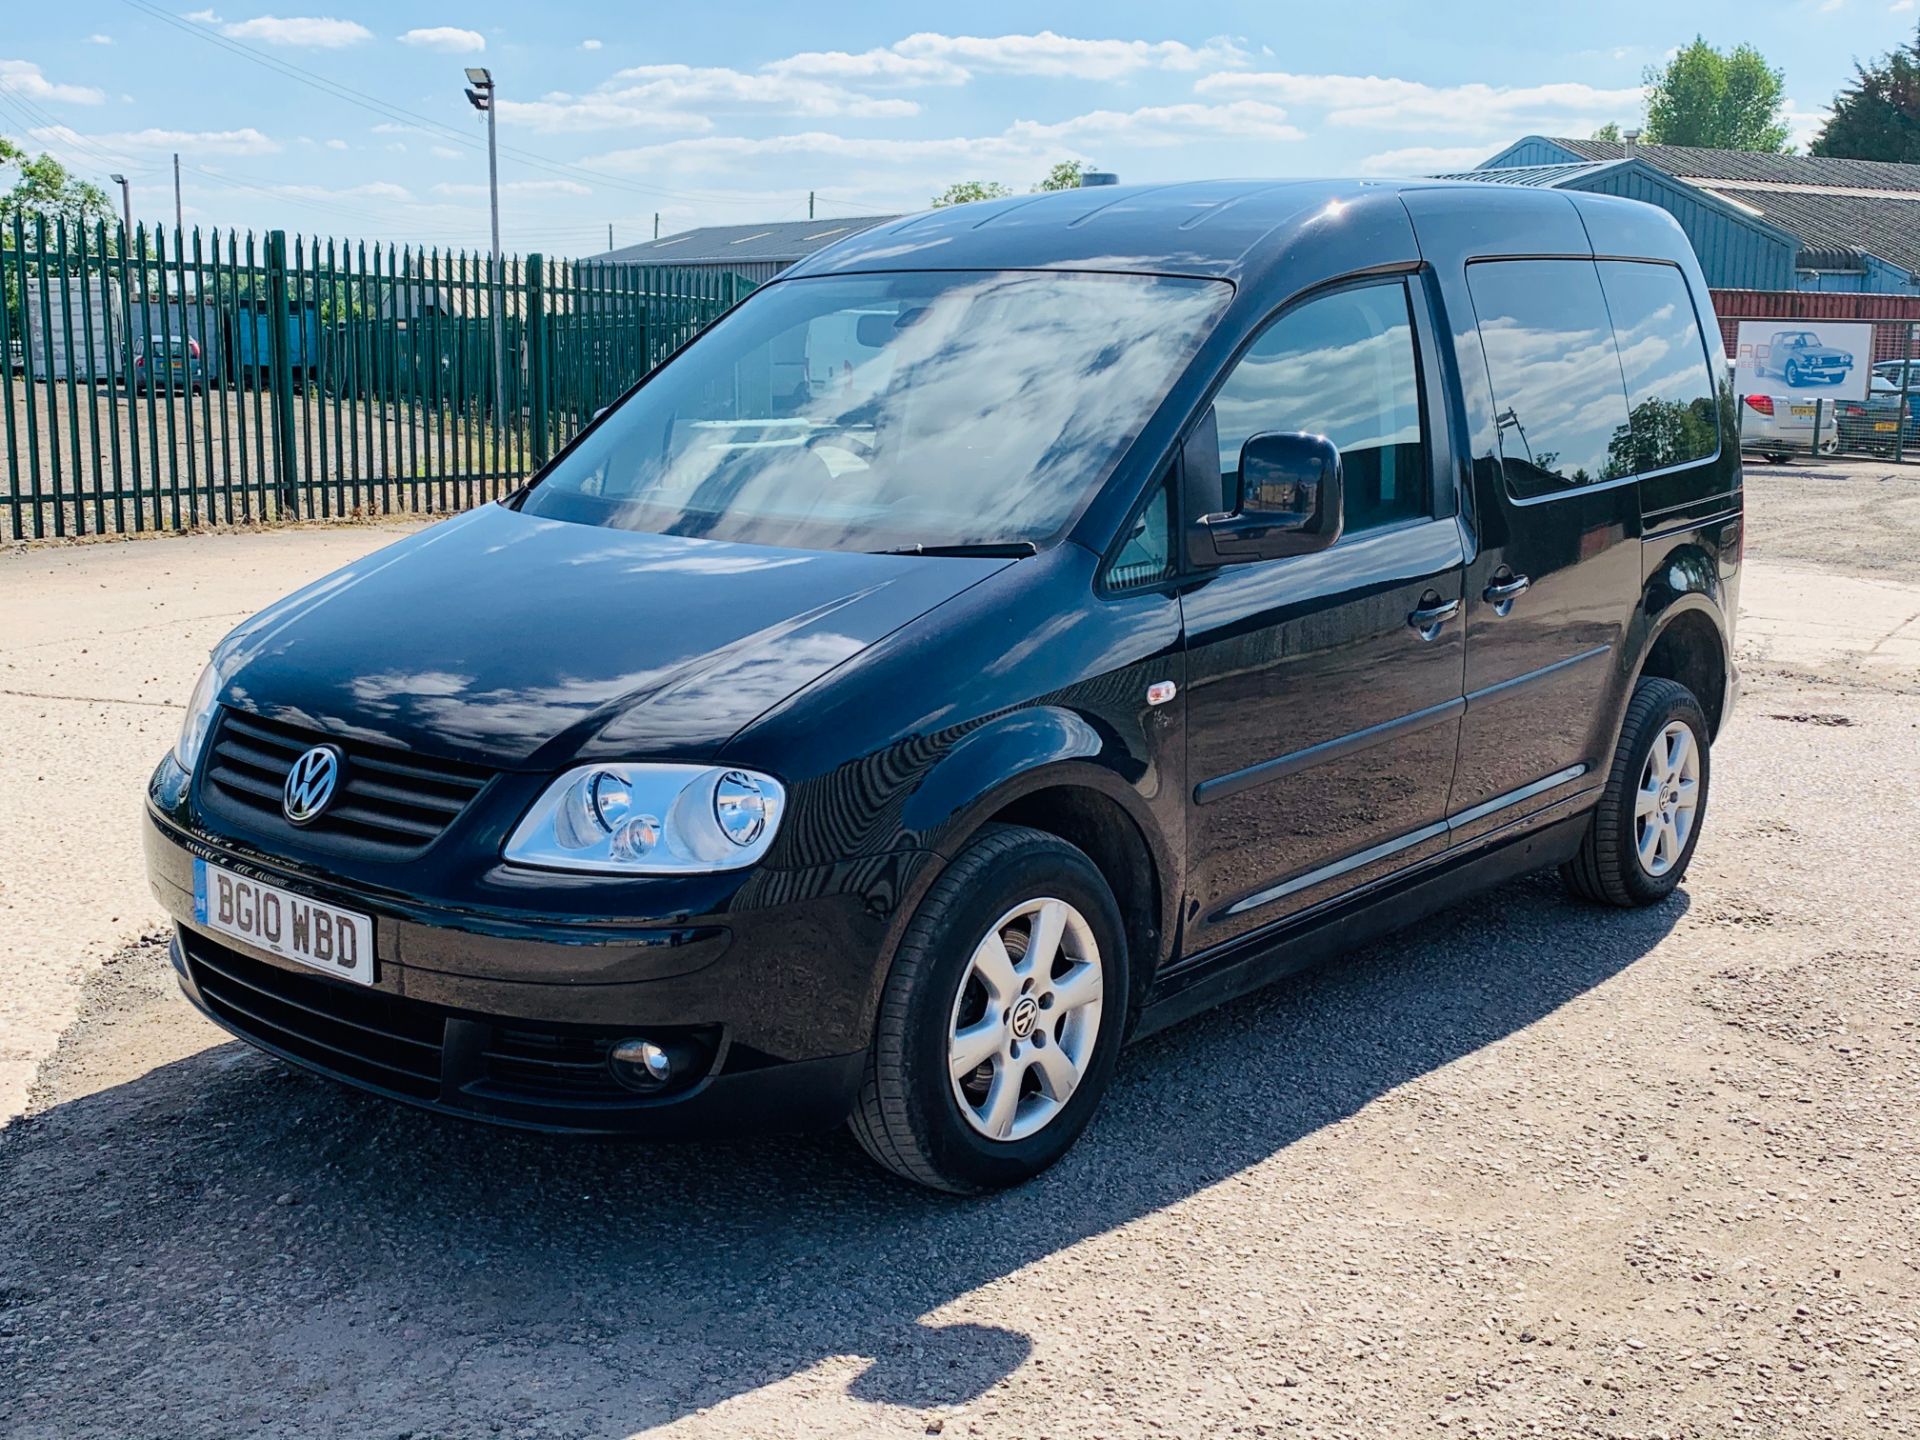 VOLKSWAGEN CADDY 1.9TDI "LIFE" DSG AUTO - WHEELCHAIR / DISABLED DRIVER VEHICLE -1 KEEPER - 42K MILES - Image 16 of 20